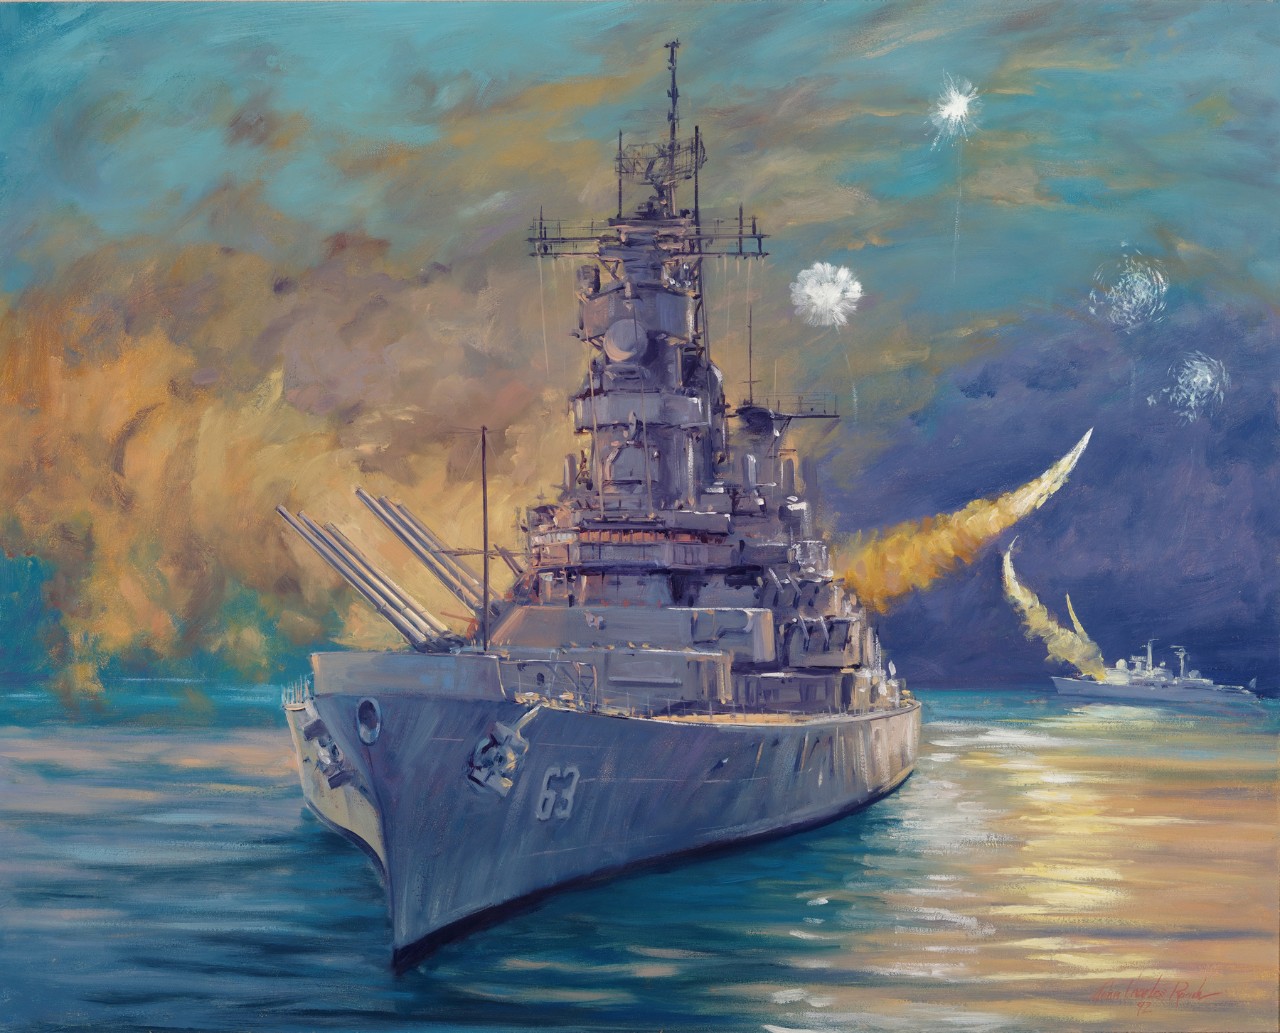 painting of ship under attack by a missile